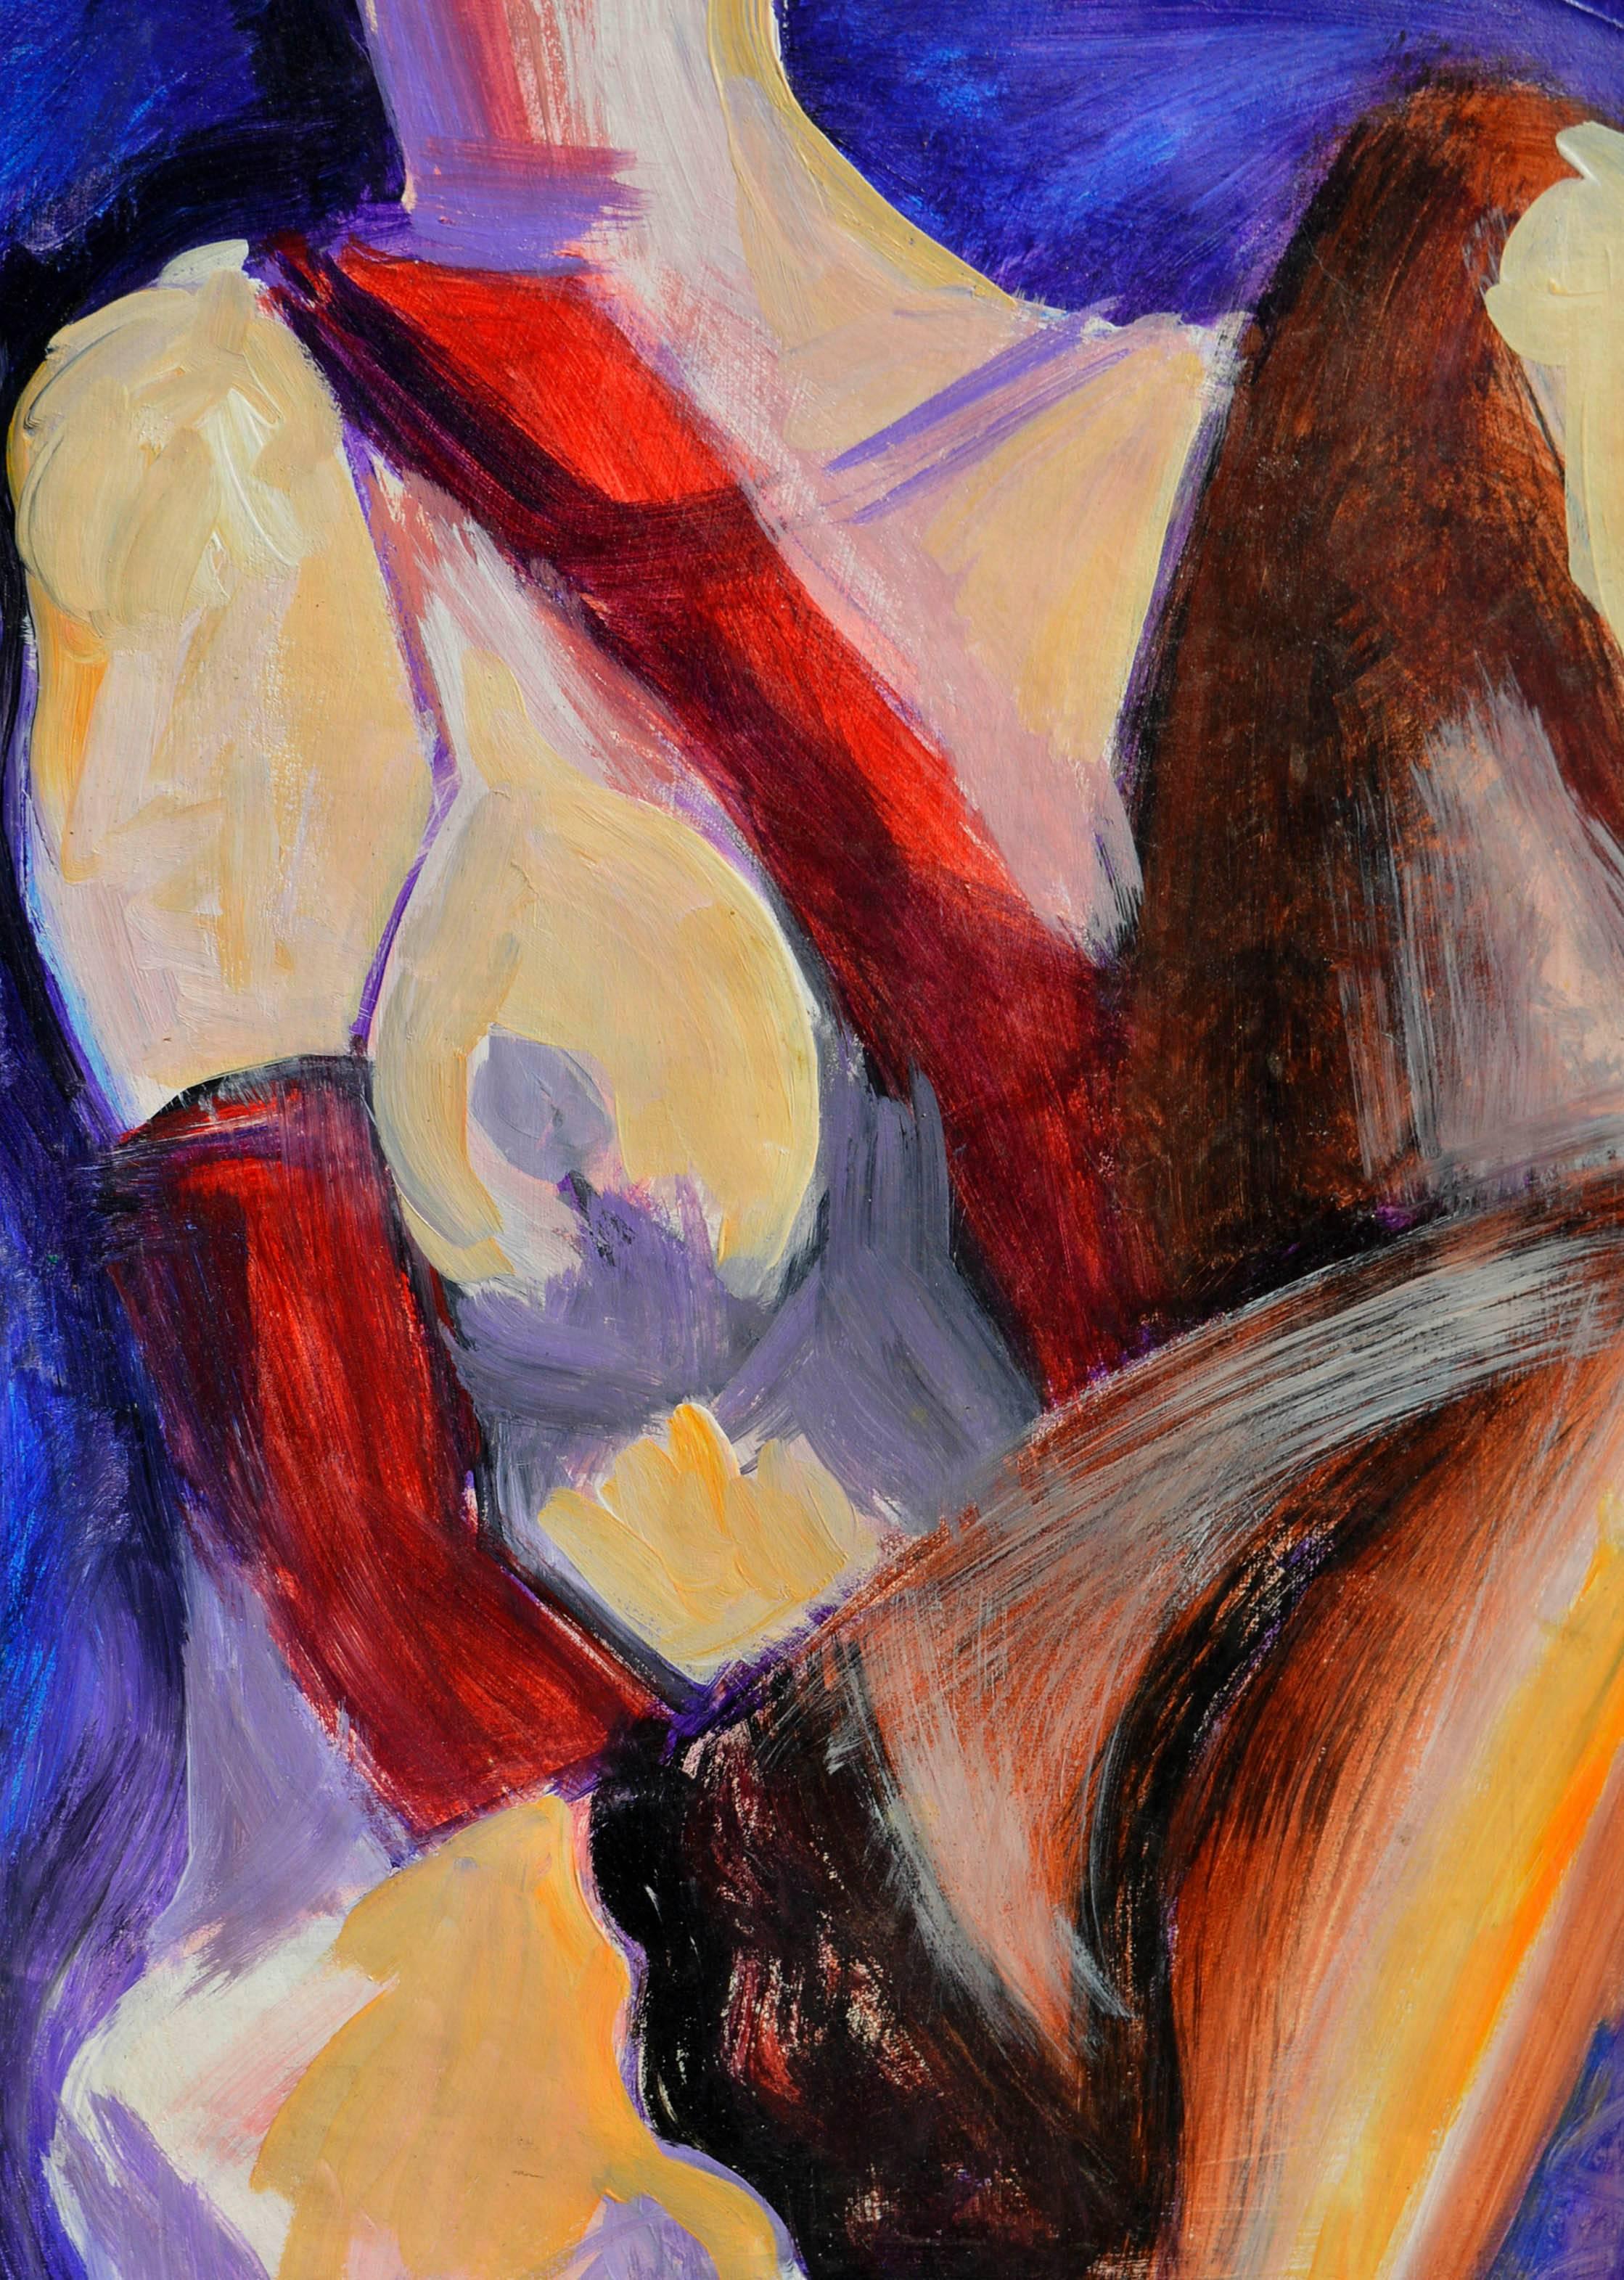 Crimson Gloves and Black Stockings Figurative - Abstract Expressionist Painting by Michael Eggleston